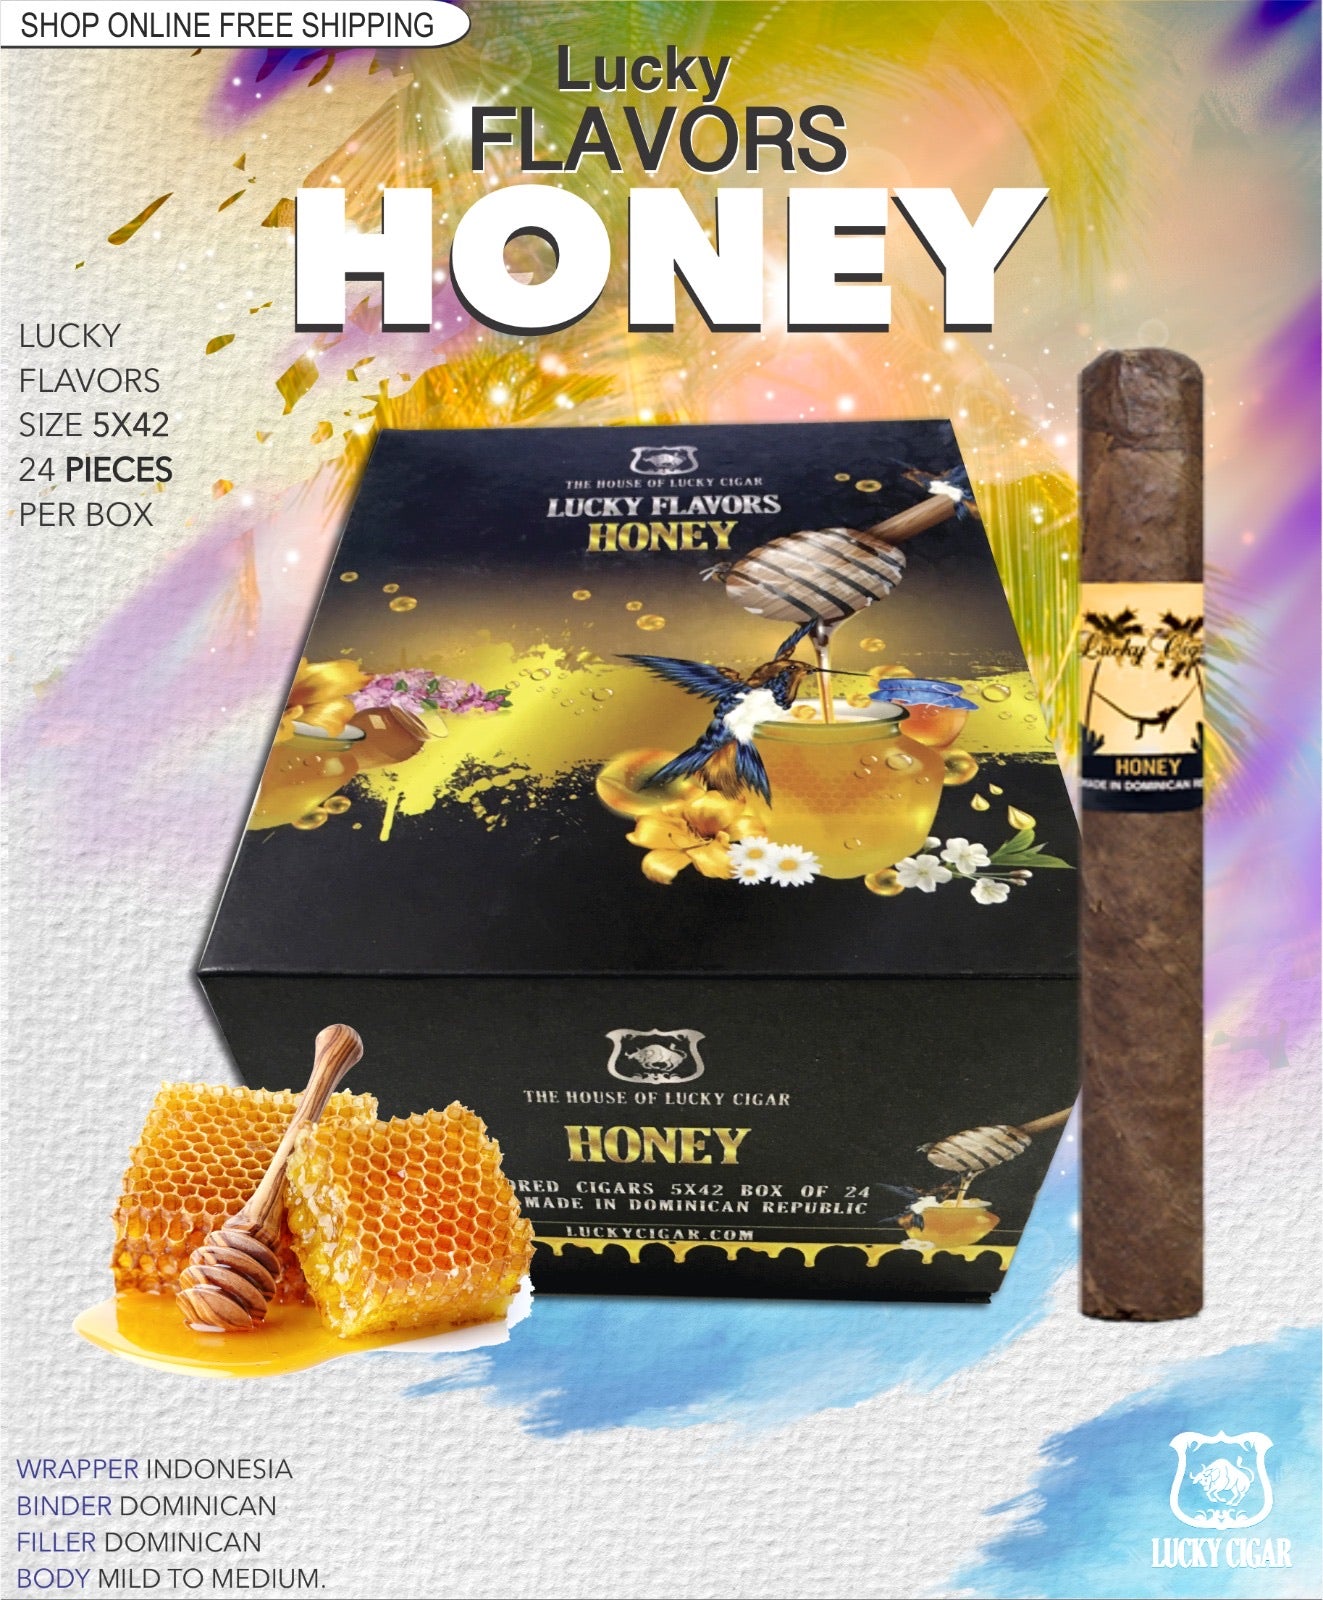 Buy Honey Flavored Cigars, Flavored Cigars